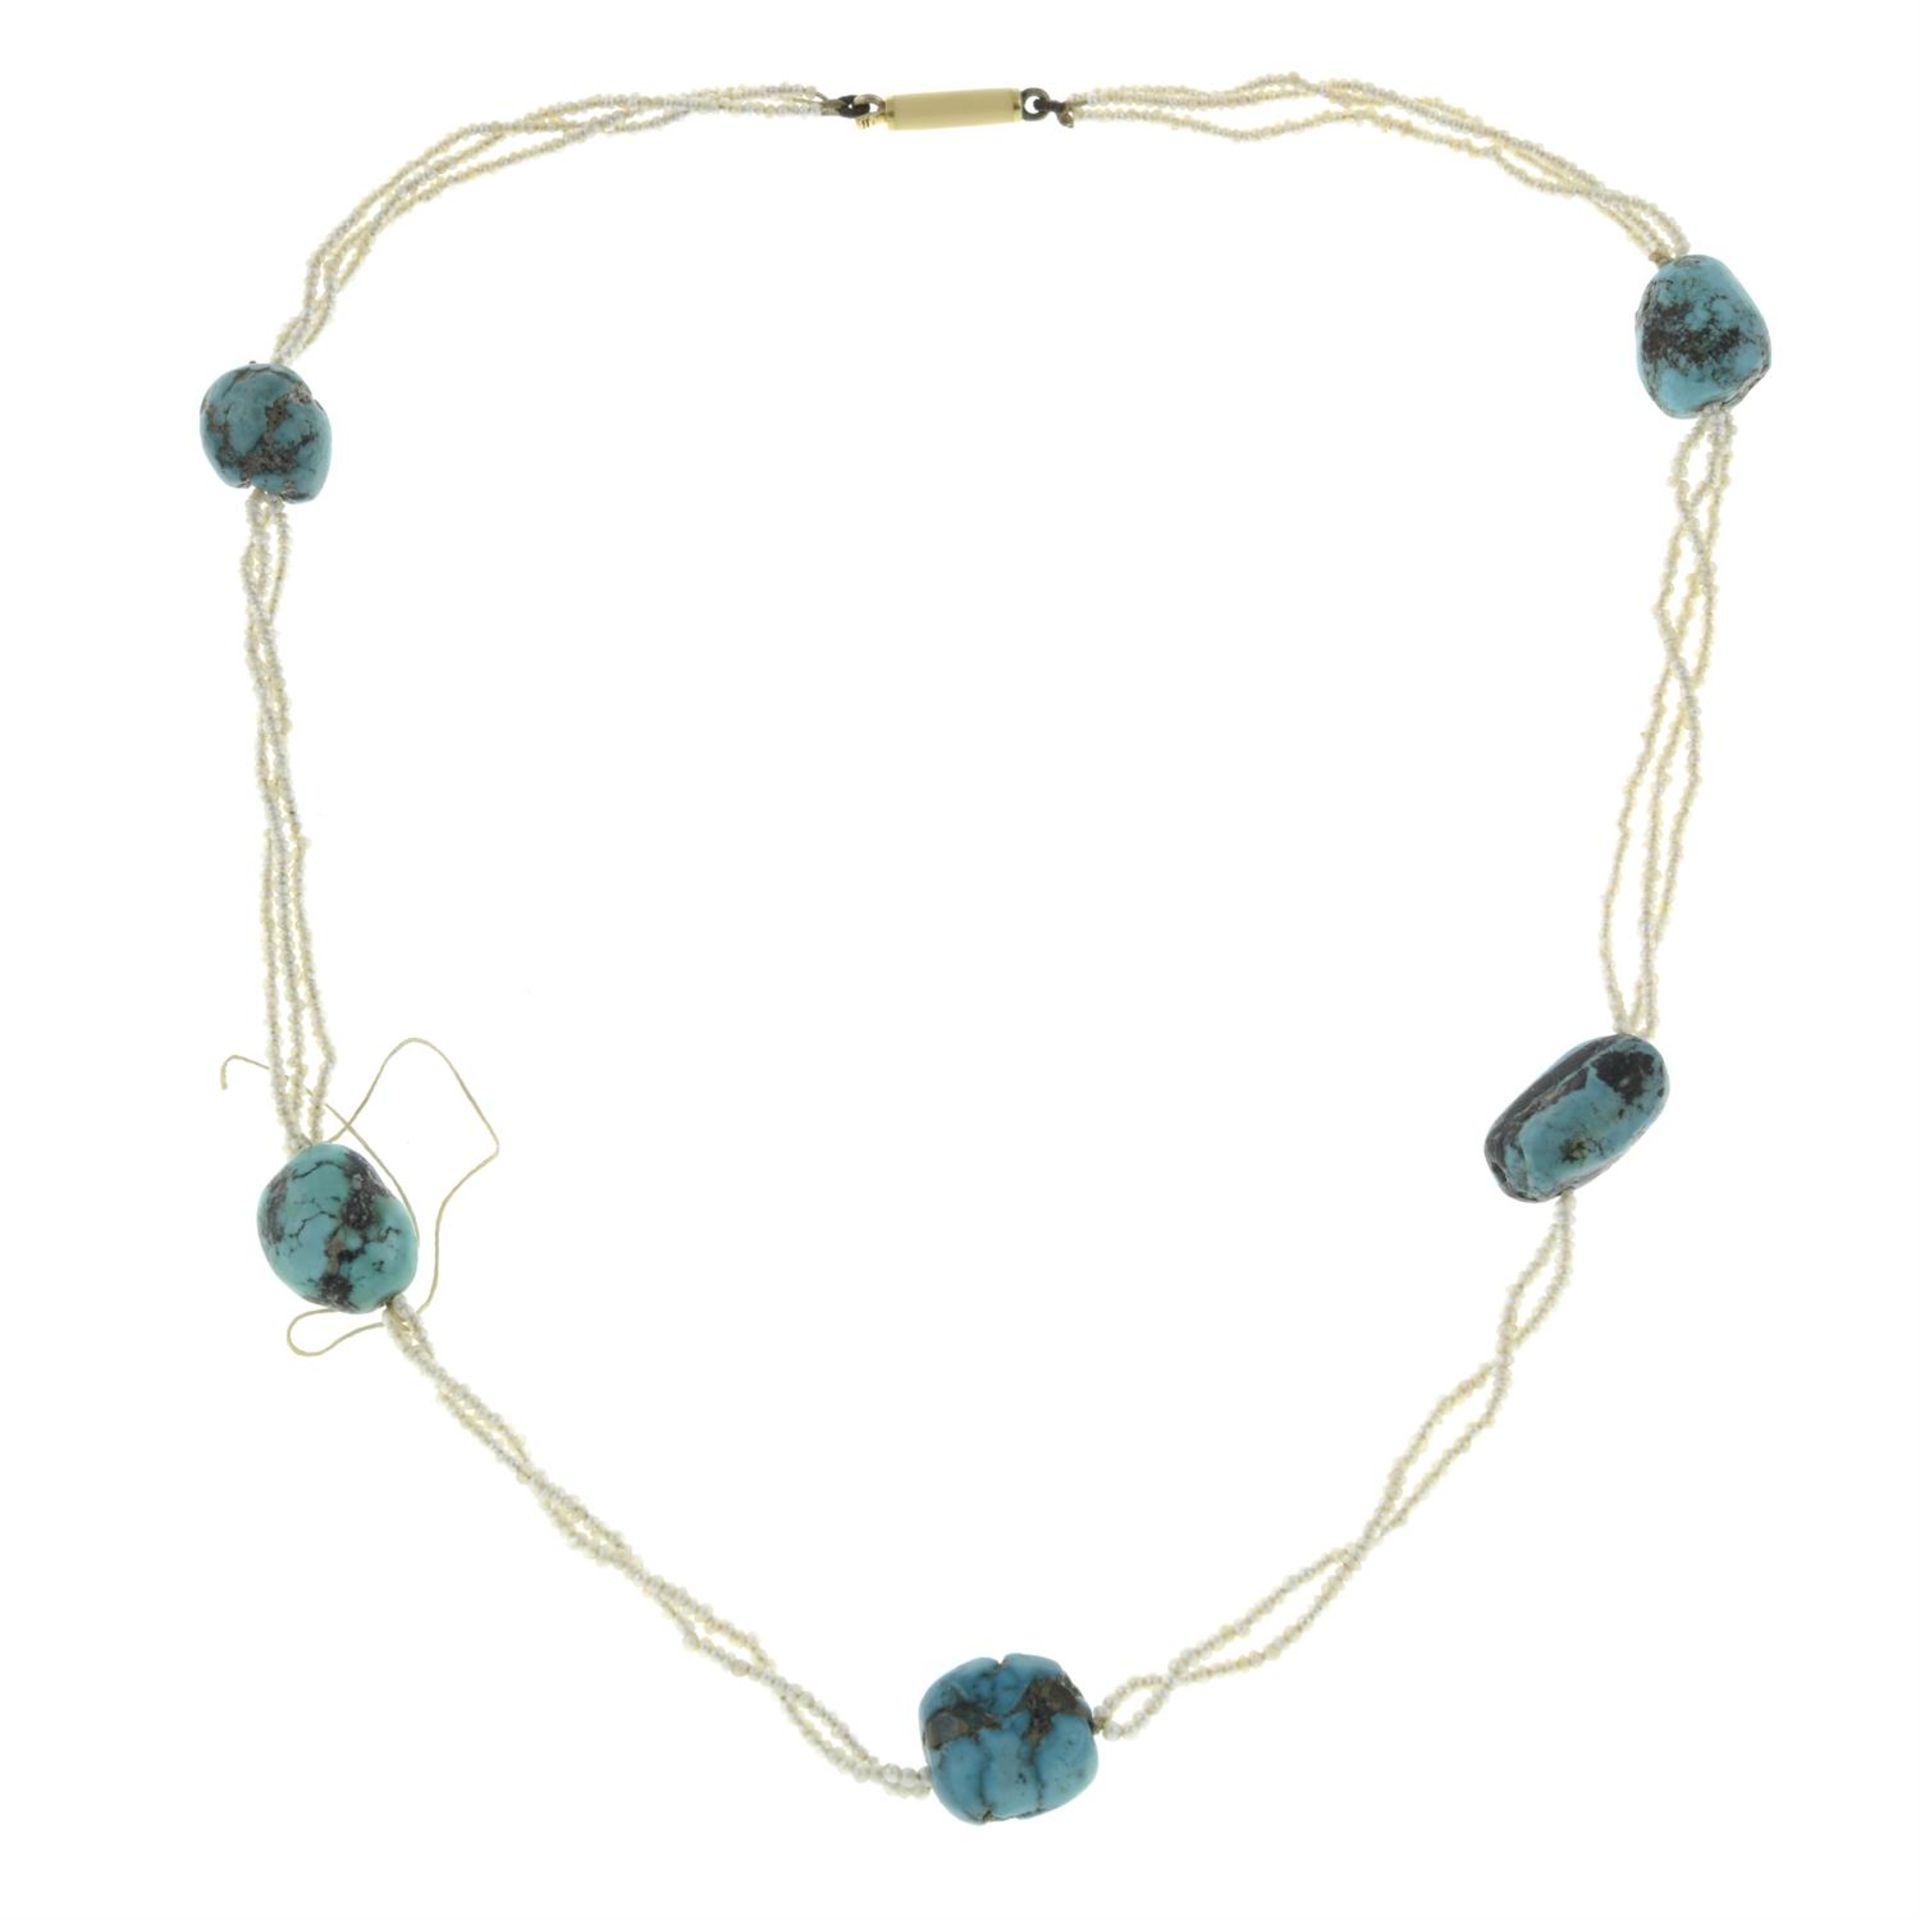 An early 20th century seed pearl three-row necklace, with turquoise bead spacers.